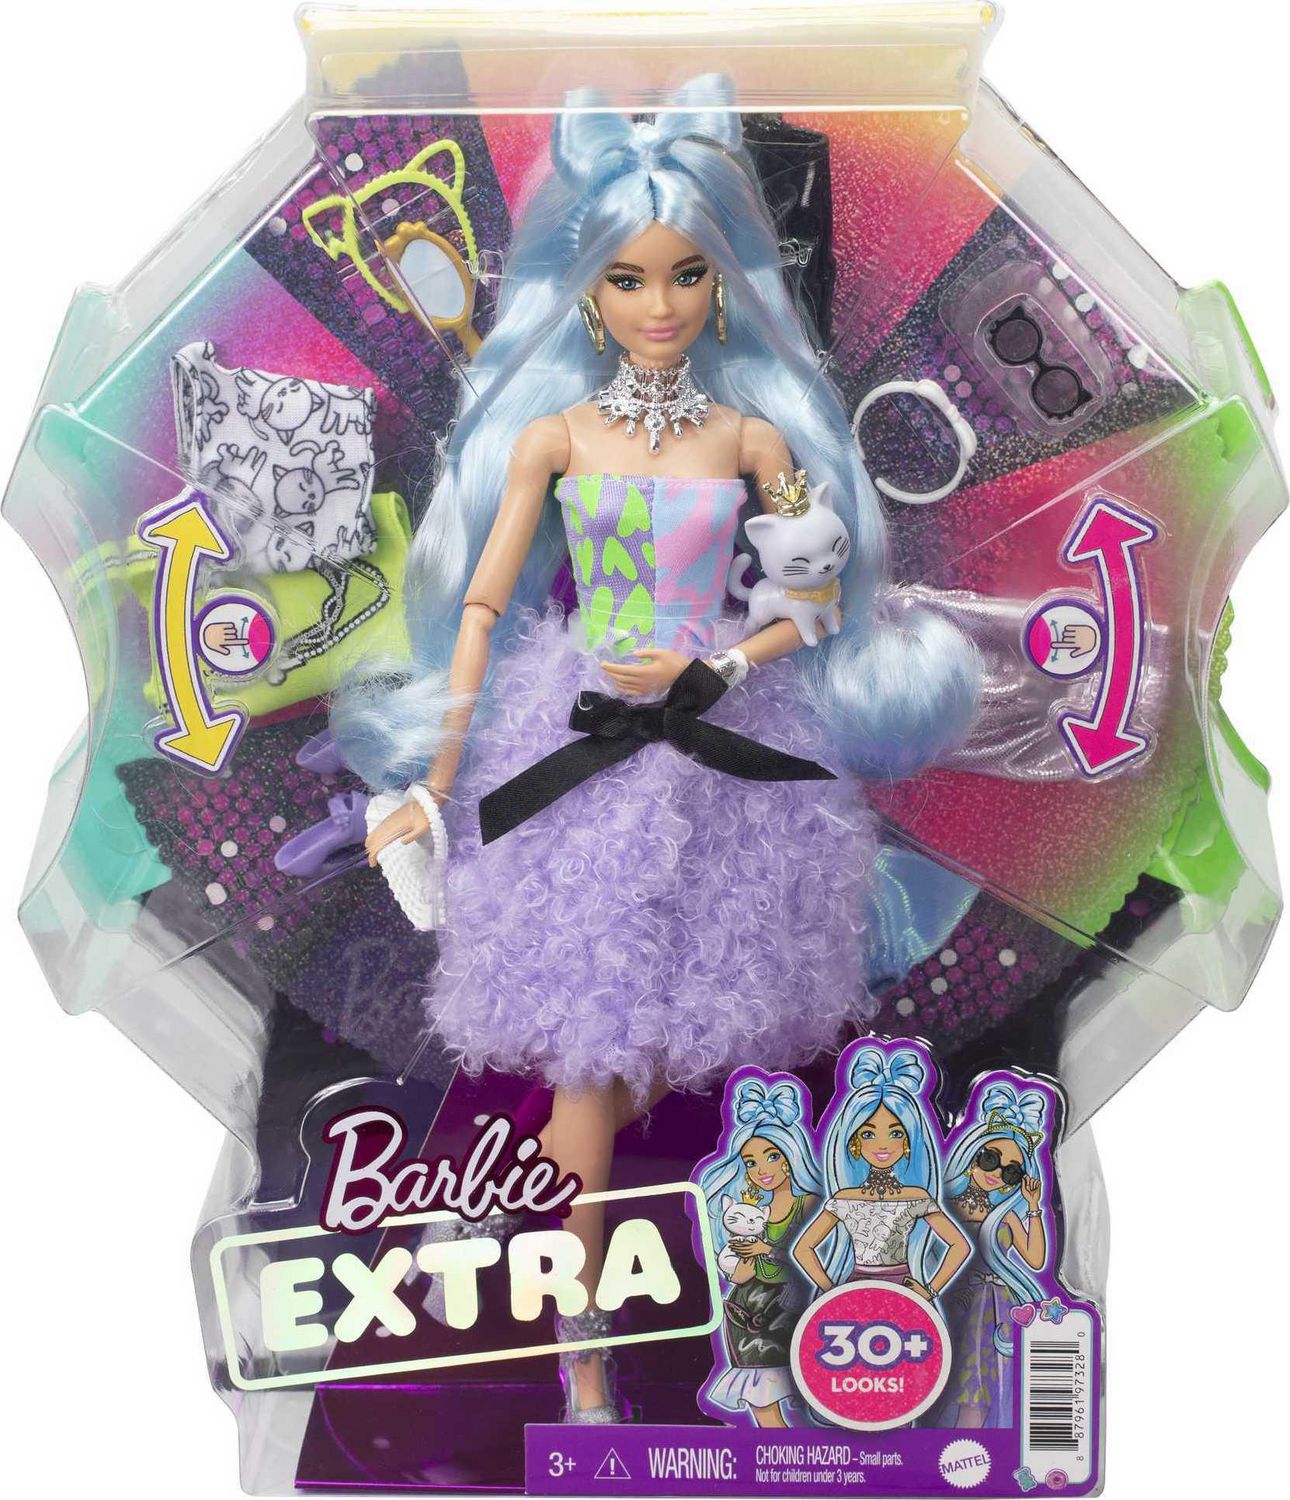 Barbie Extra Doll & Accessories Set with Mix & Match Pieces for 30+ Looks 